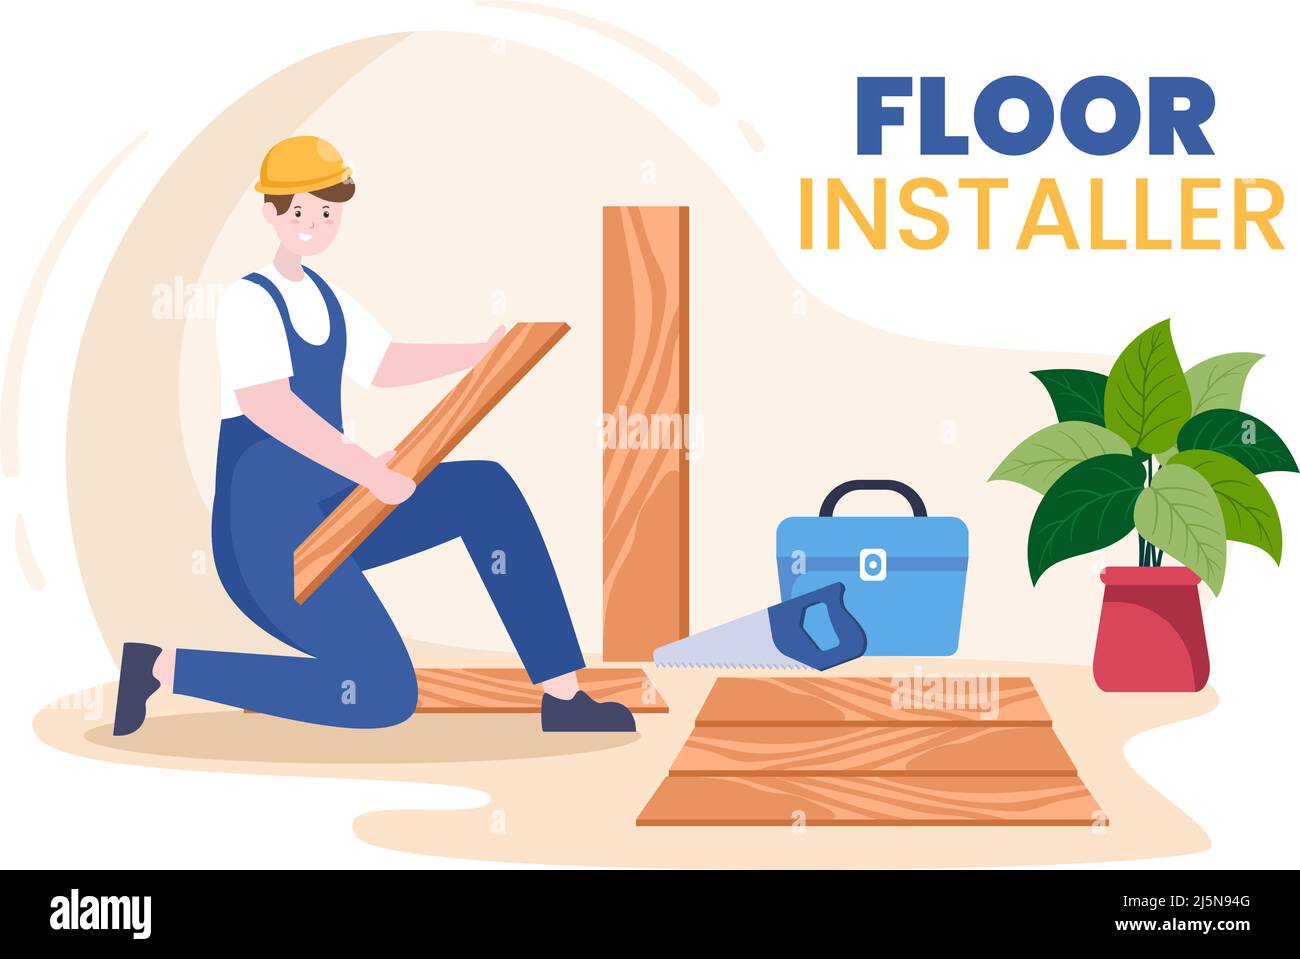 Floor Installation Cartoon Illustration with Repairman, Laying Professional Parquet, Wood or tile Floors in House Flooring Renovation Design Stock Vector